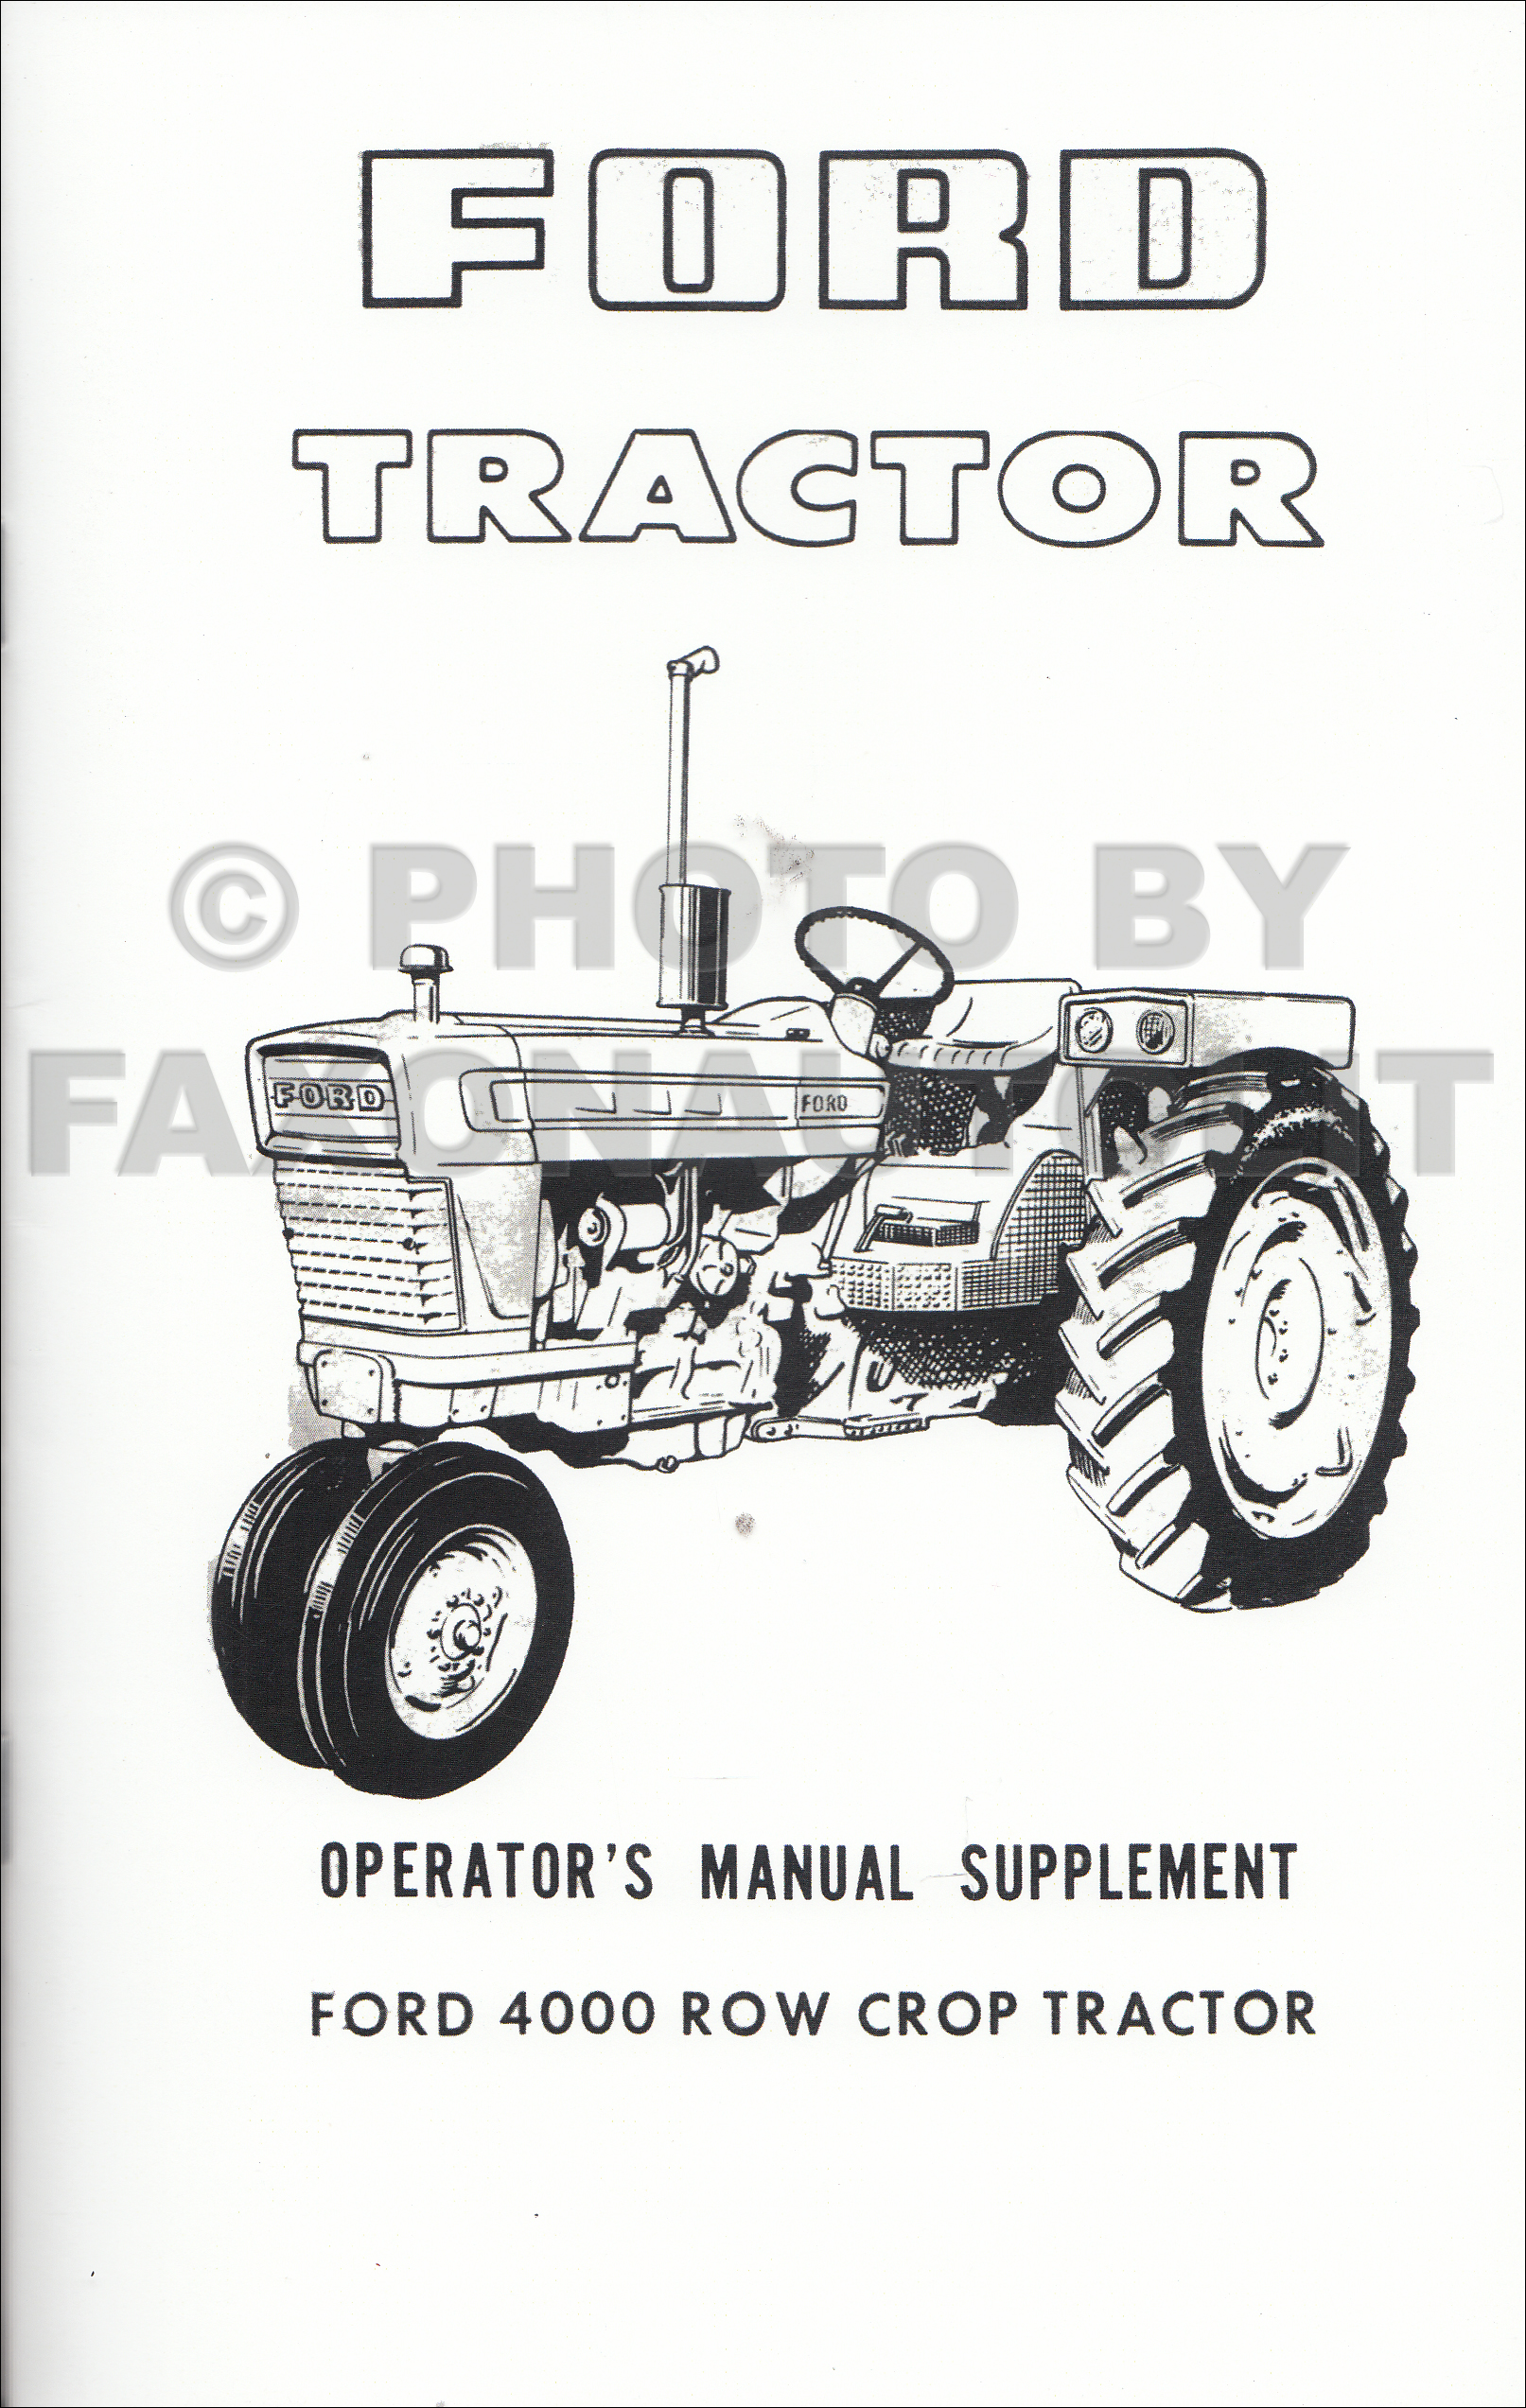 1965-1975 Ford 4000 Row Crop Tractor Owner's Manual Supplement Reprint